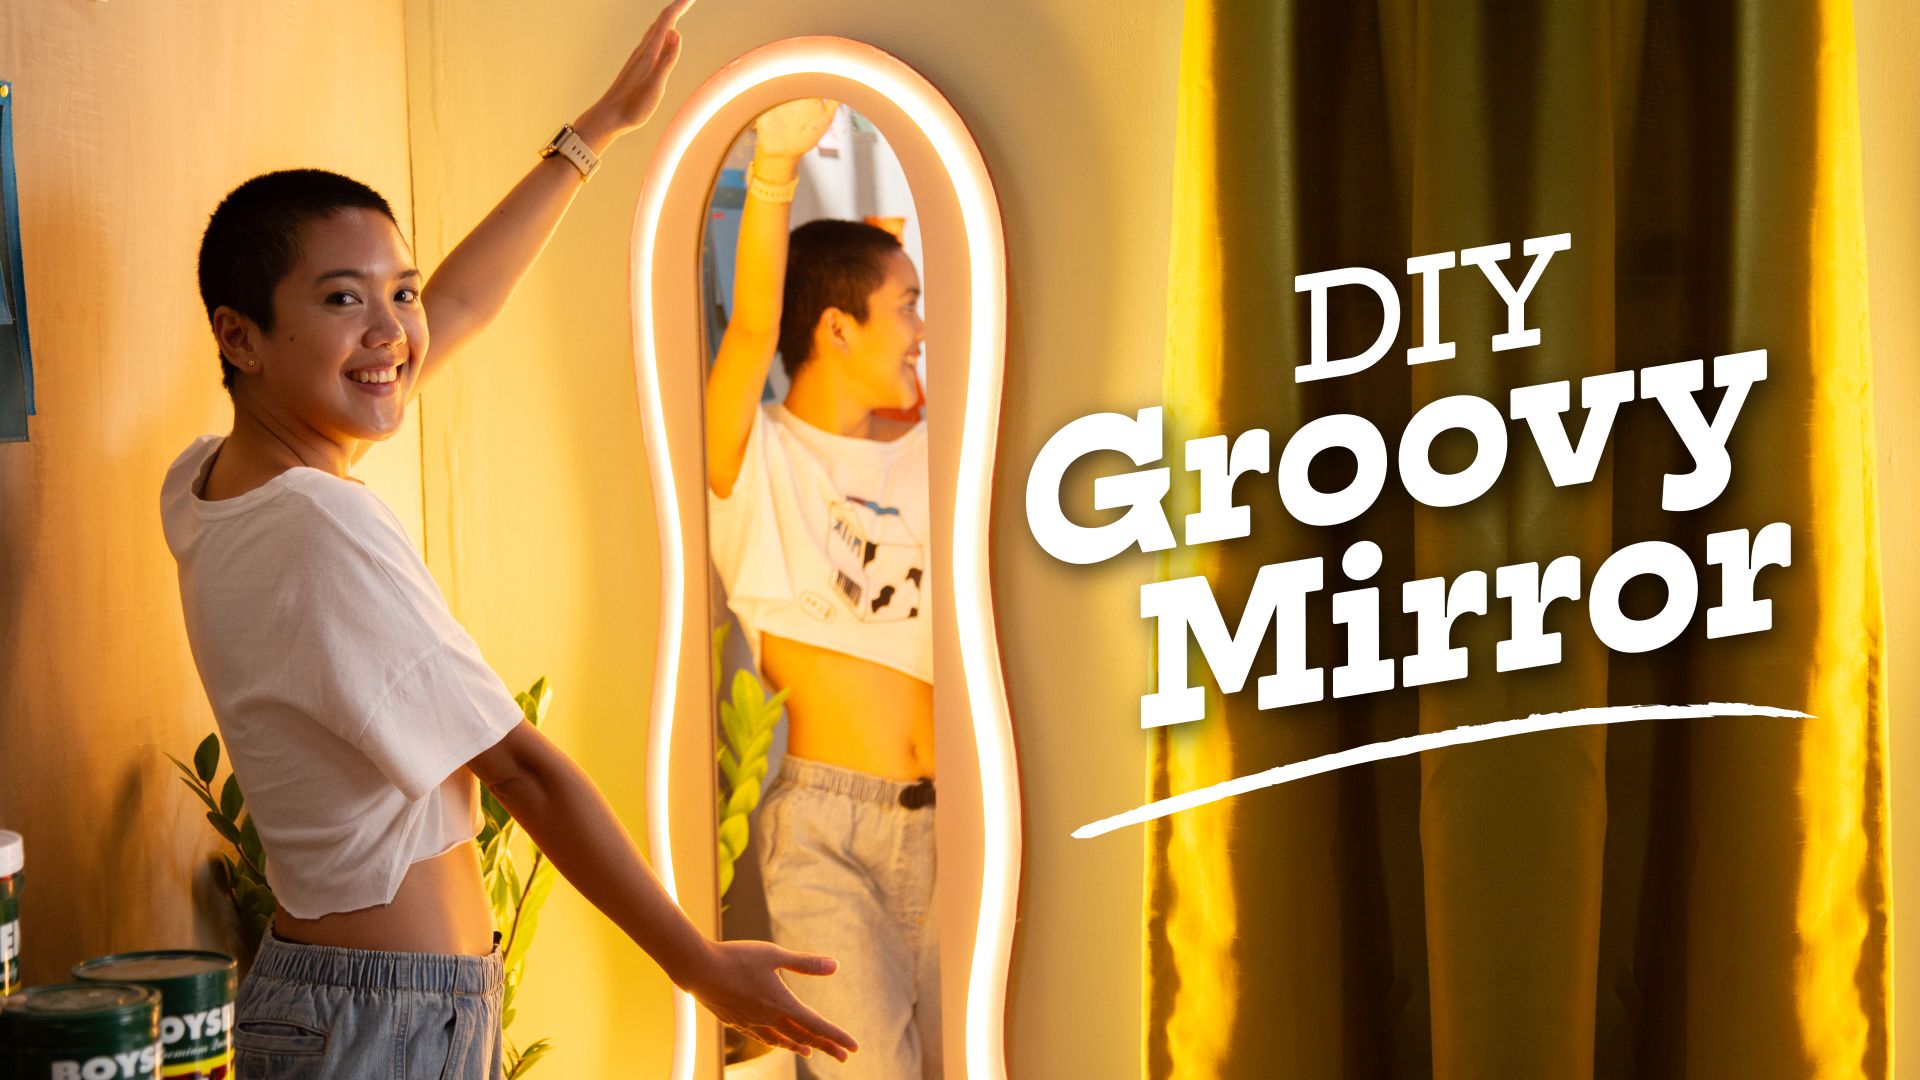 BUILD WITH B
GROOVY MIRROR